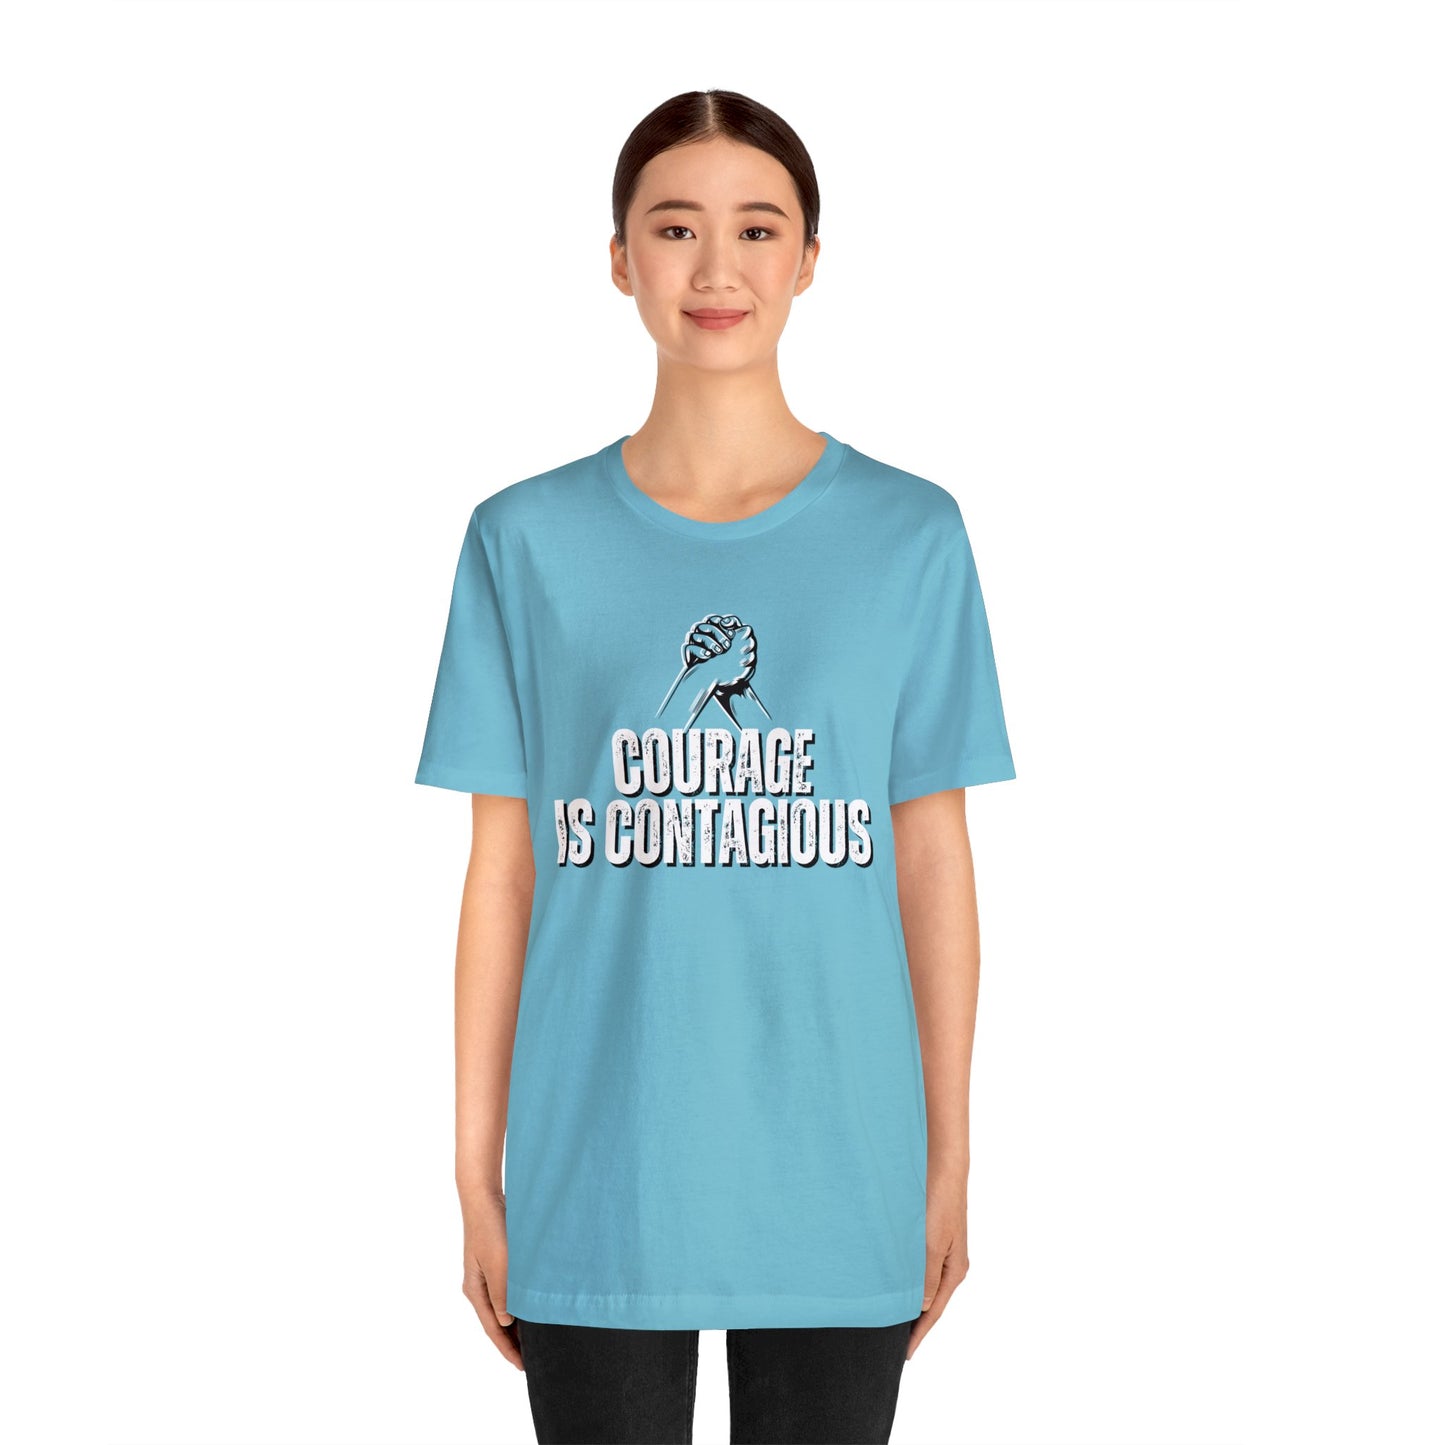 INSPIRED Women Courage Is Contagious Jersey Short Sleeve Tee